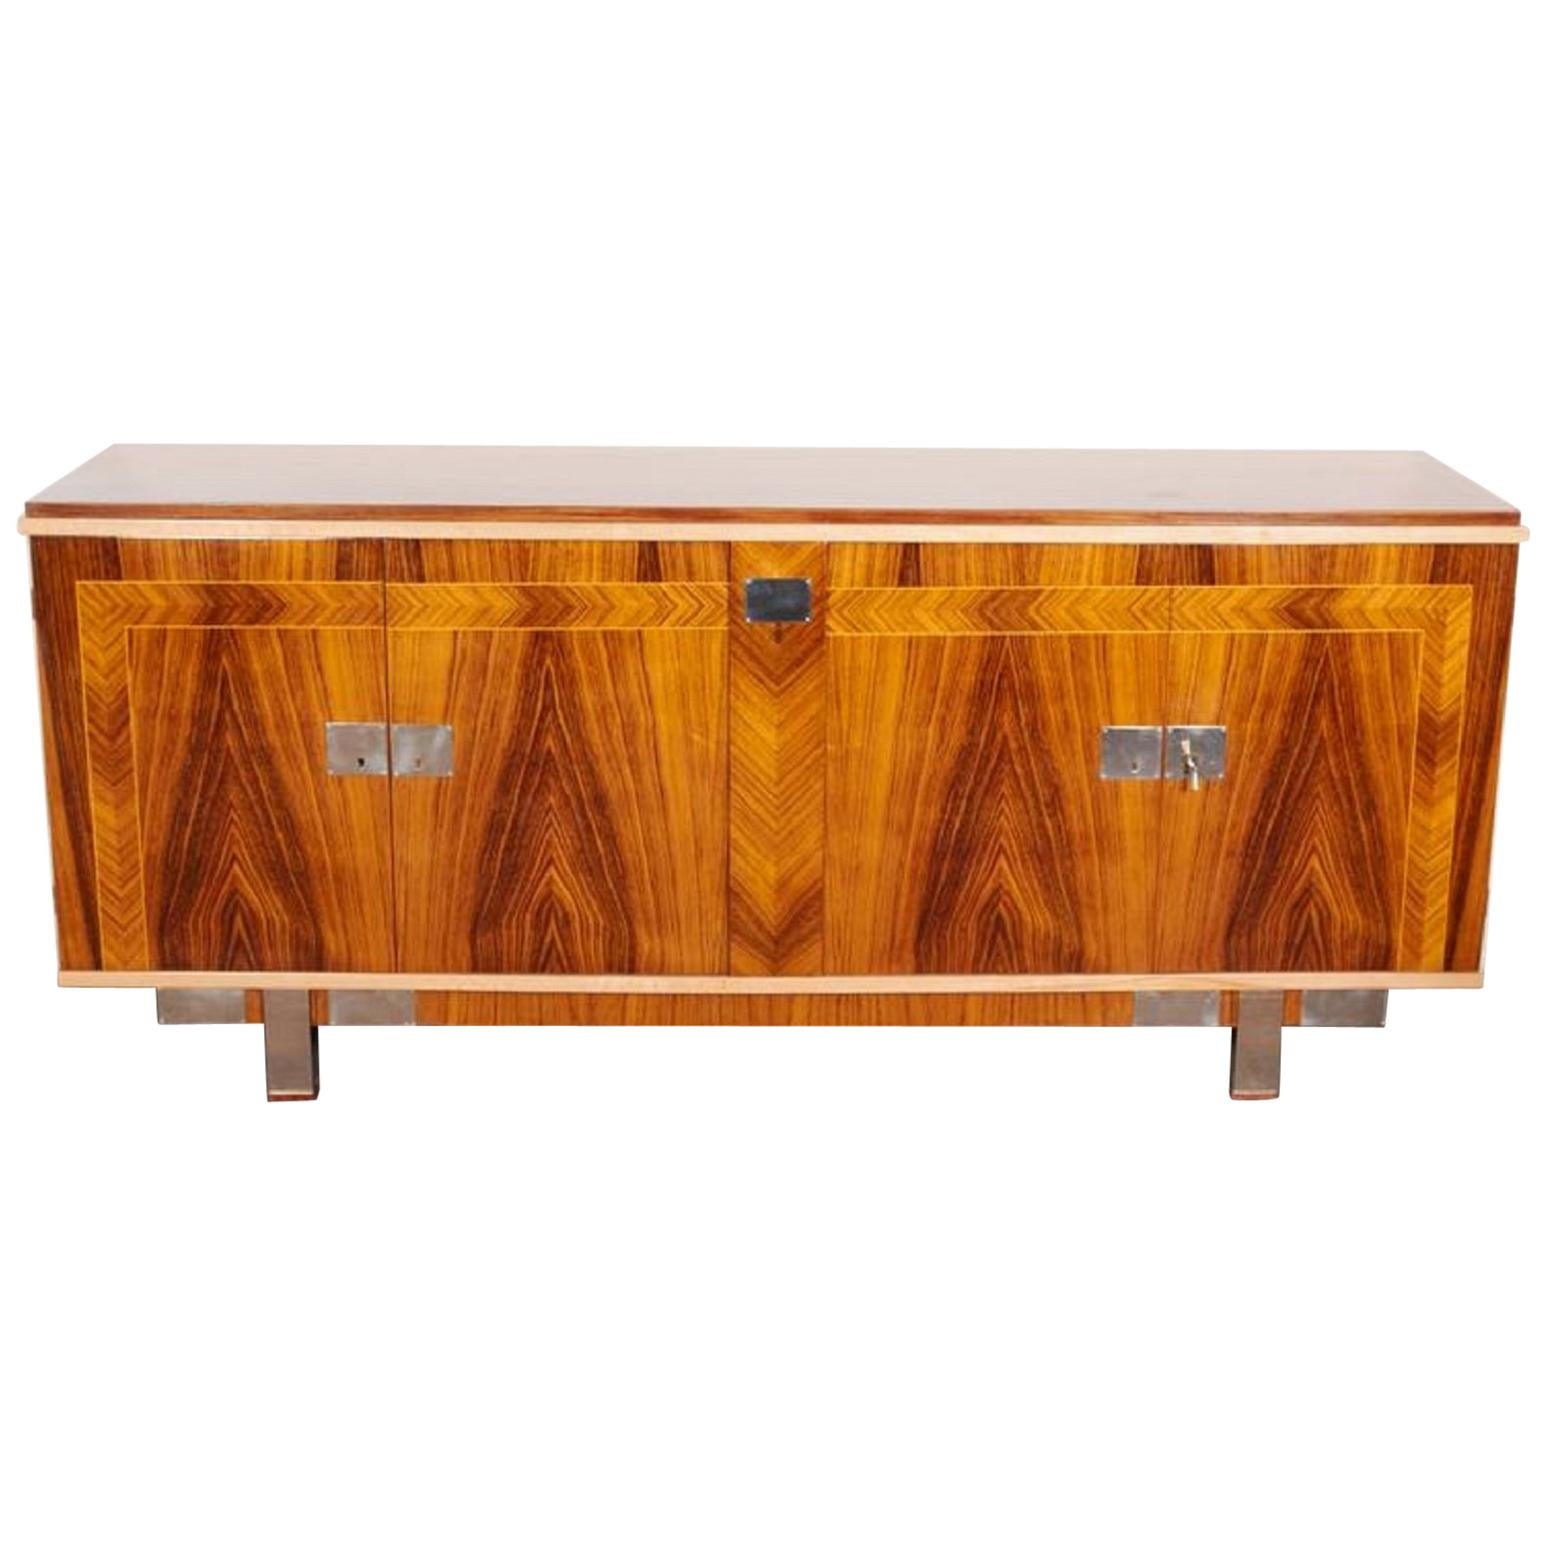 French Mid-Century Modern Palisander Cabinet with Blonde and Nickeled Accents For Sale